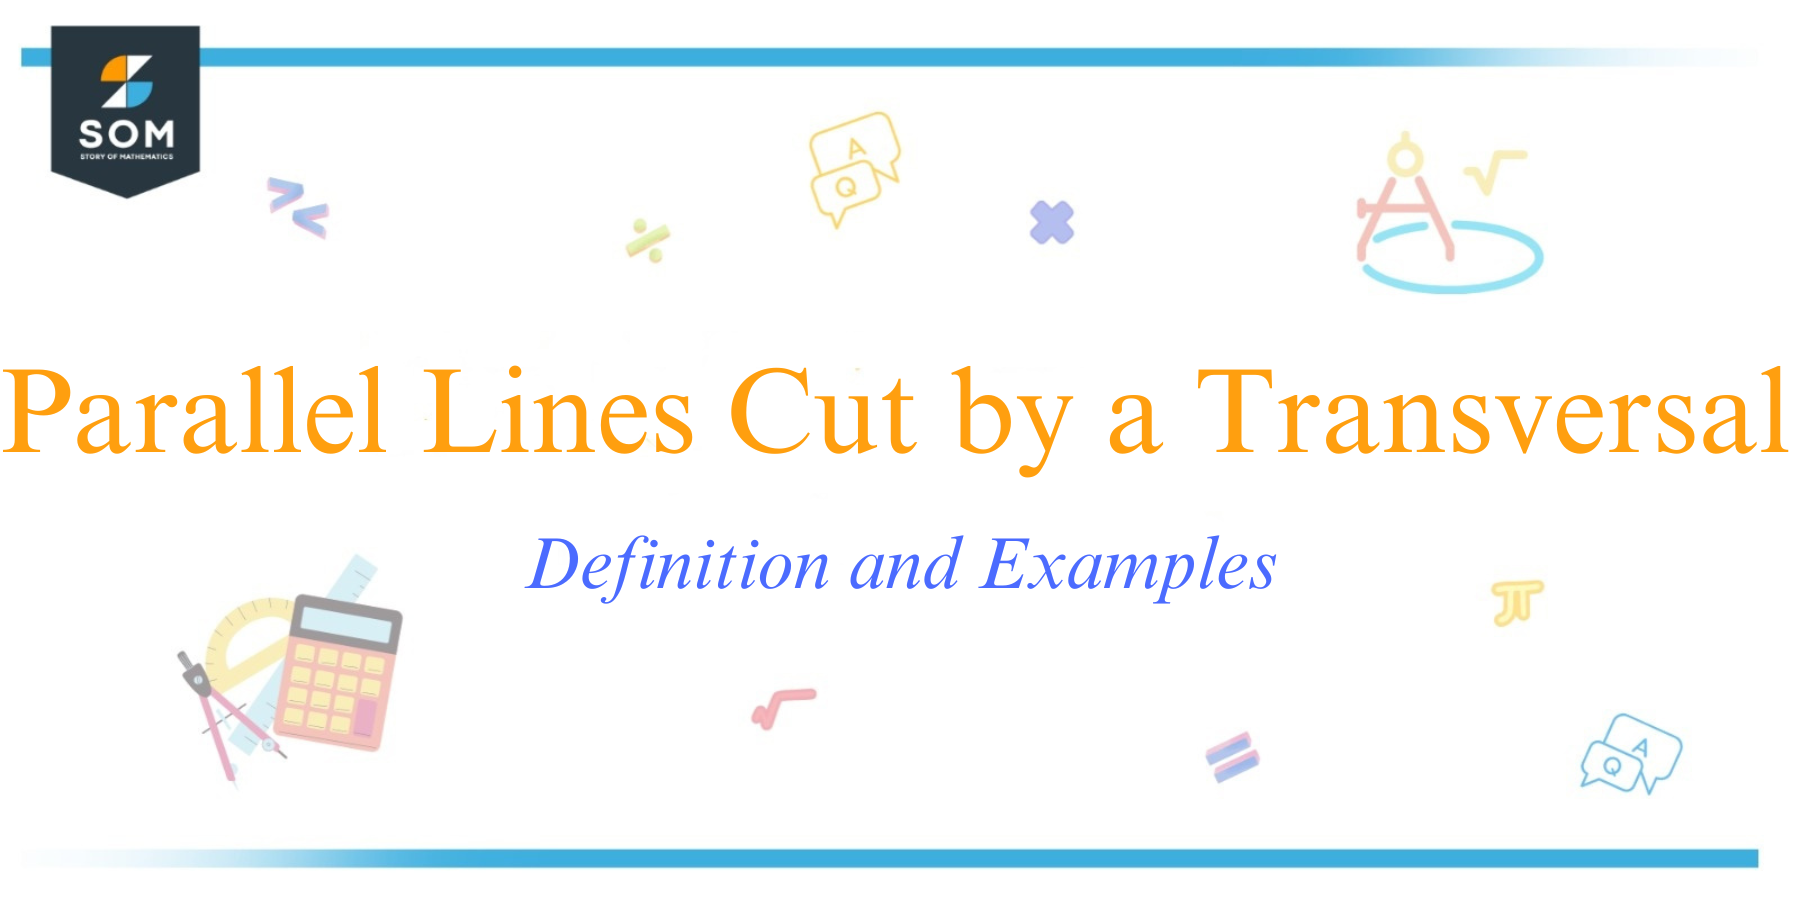 Parallel Lines Cut by a Transversal Definition and